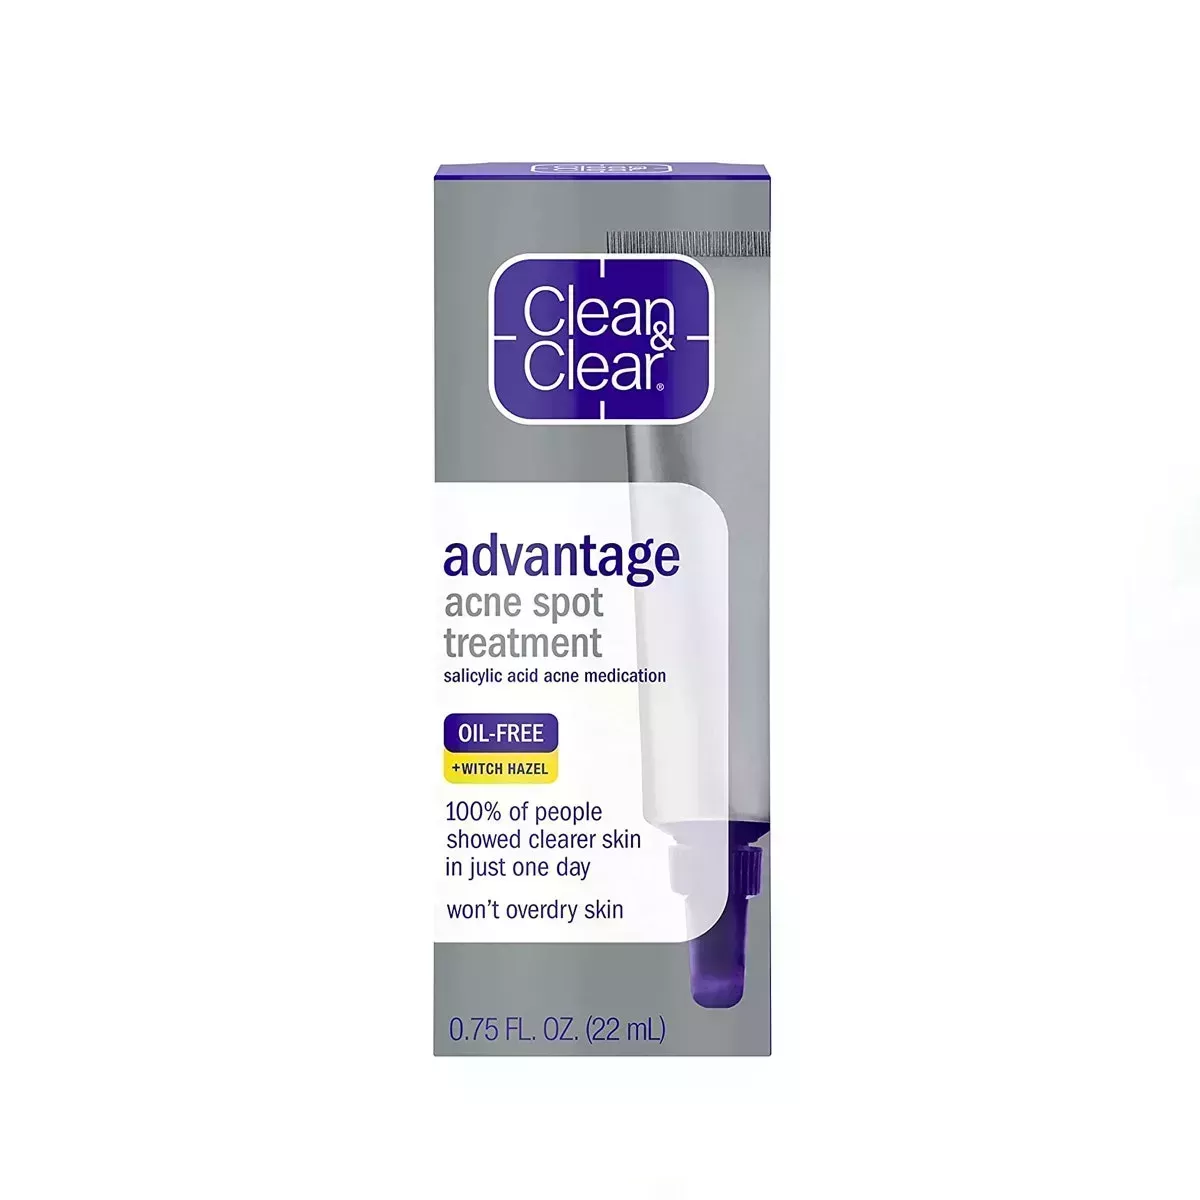 Clean & Clear Advantage Acne Spot Treatment on white background